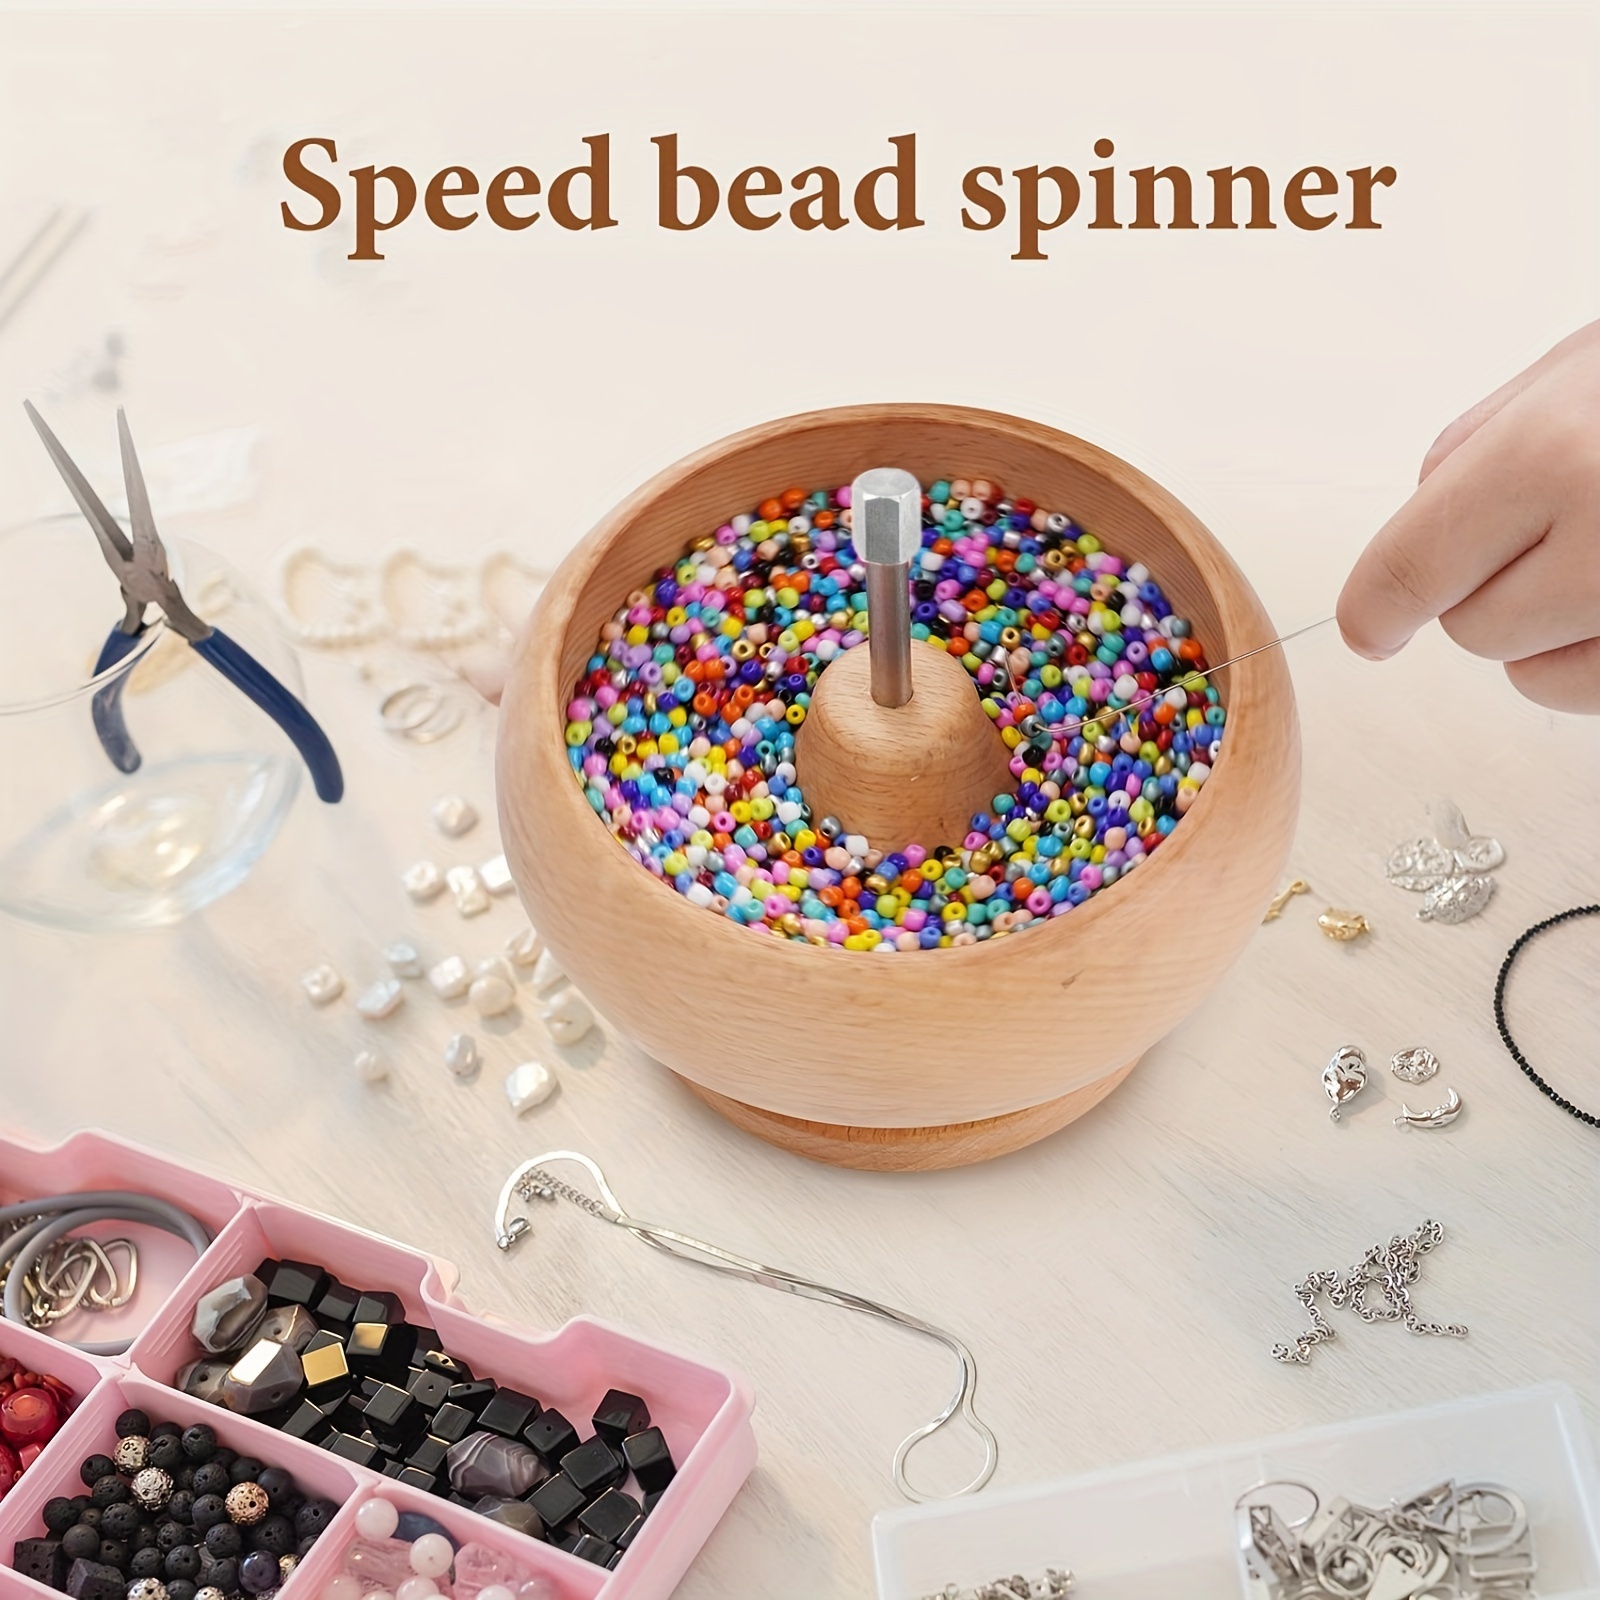 Beadalon Spin N Bead Spinner for Fast Stringing - Ideal for Beaders,  Jewelry Makers & Designers - Wood Bowl with Big Eye Needle - Saves Time &  Loads